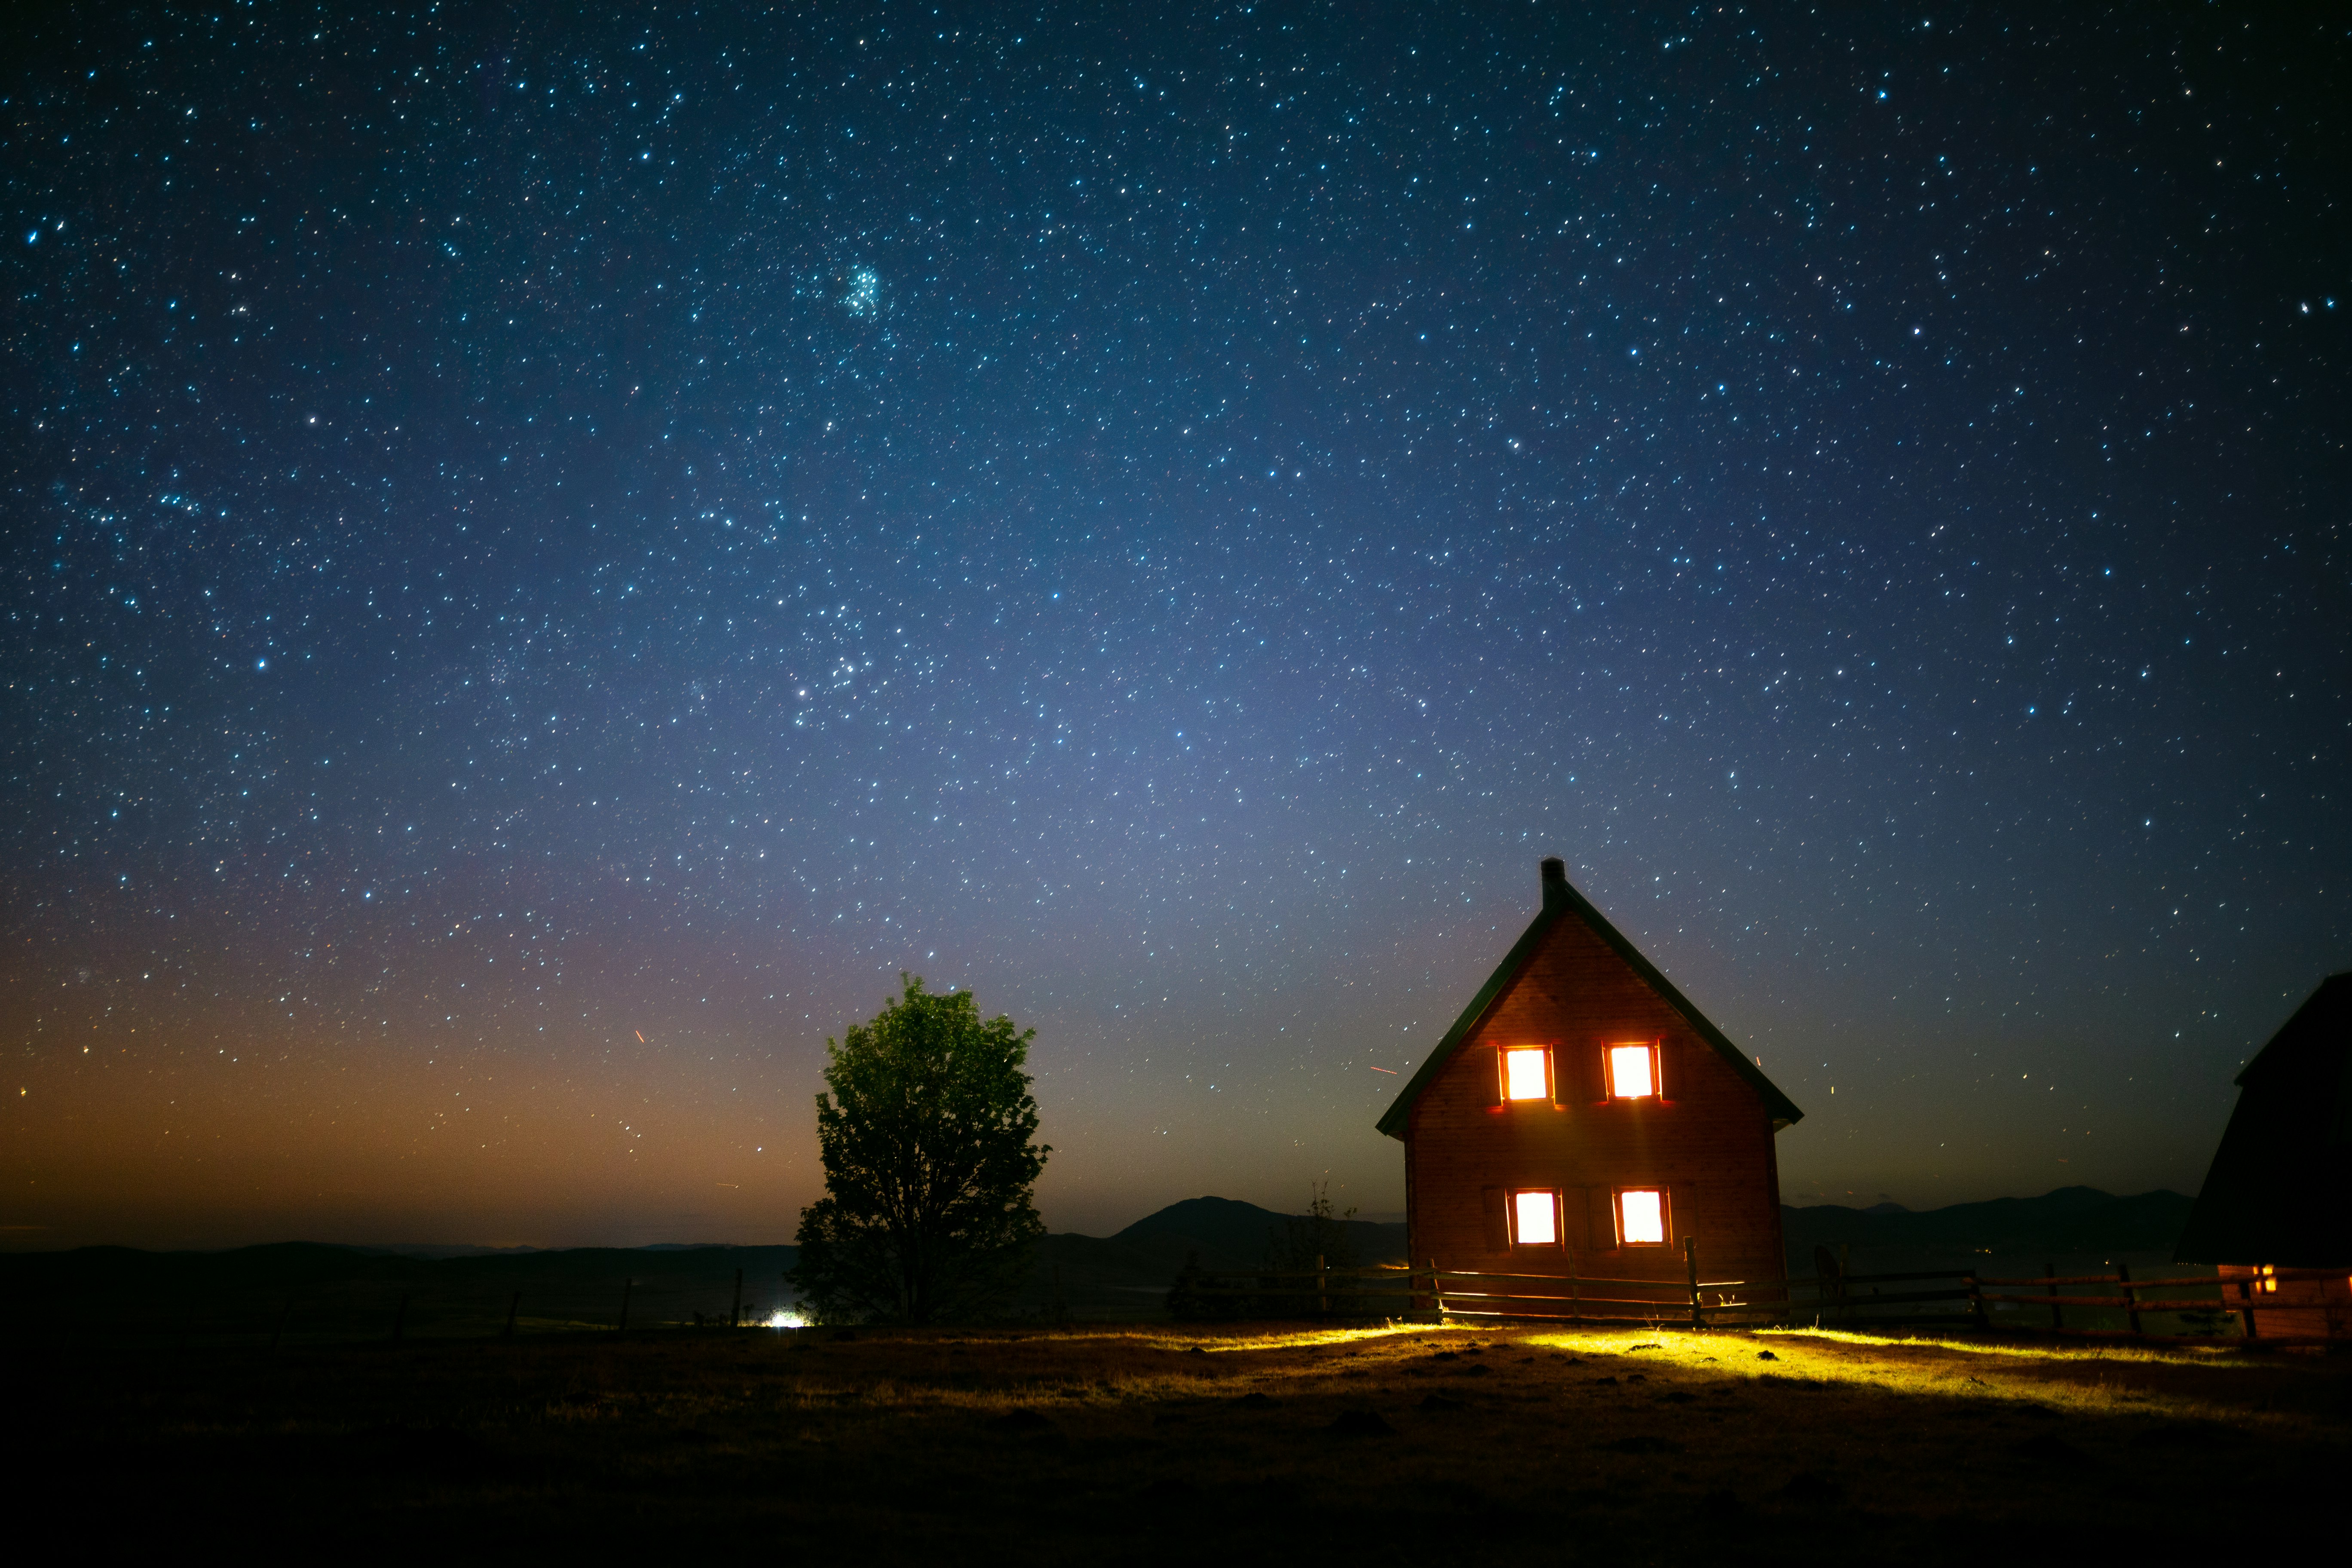 brown wooden house near green tree under blue sky during night time